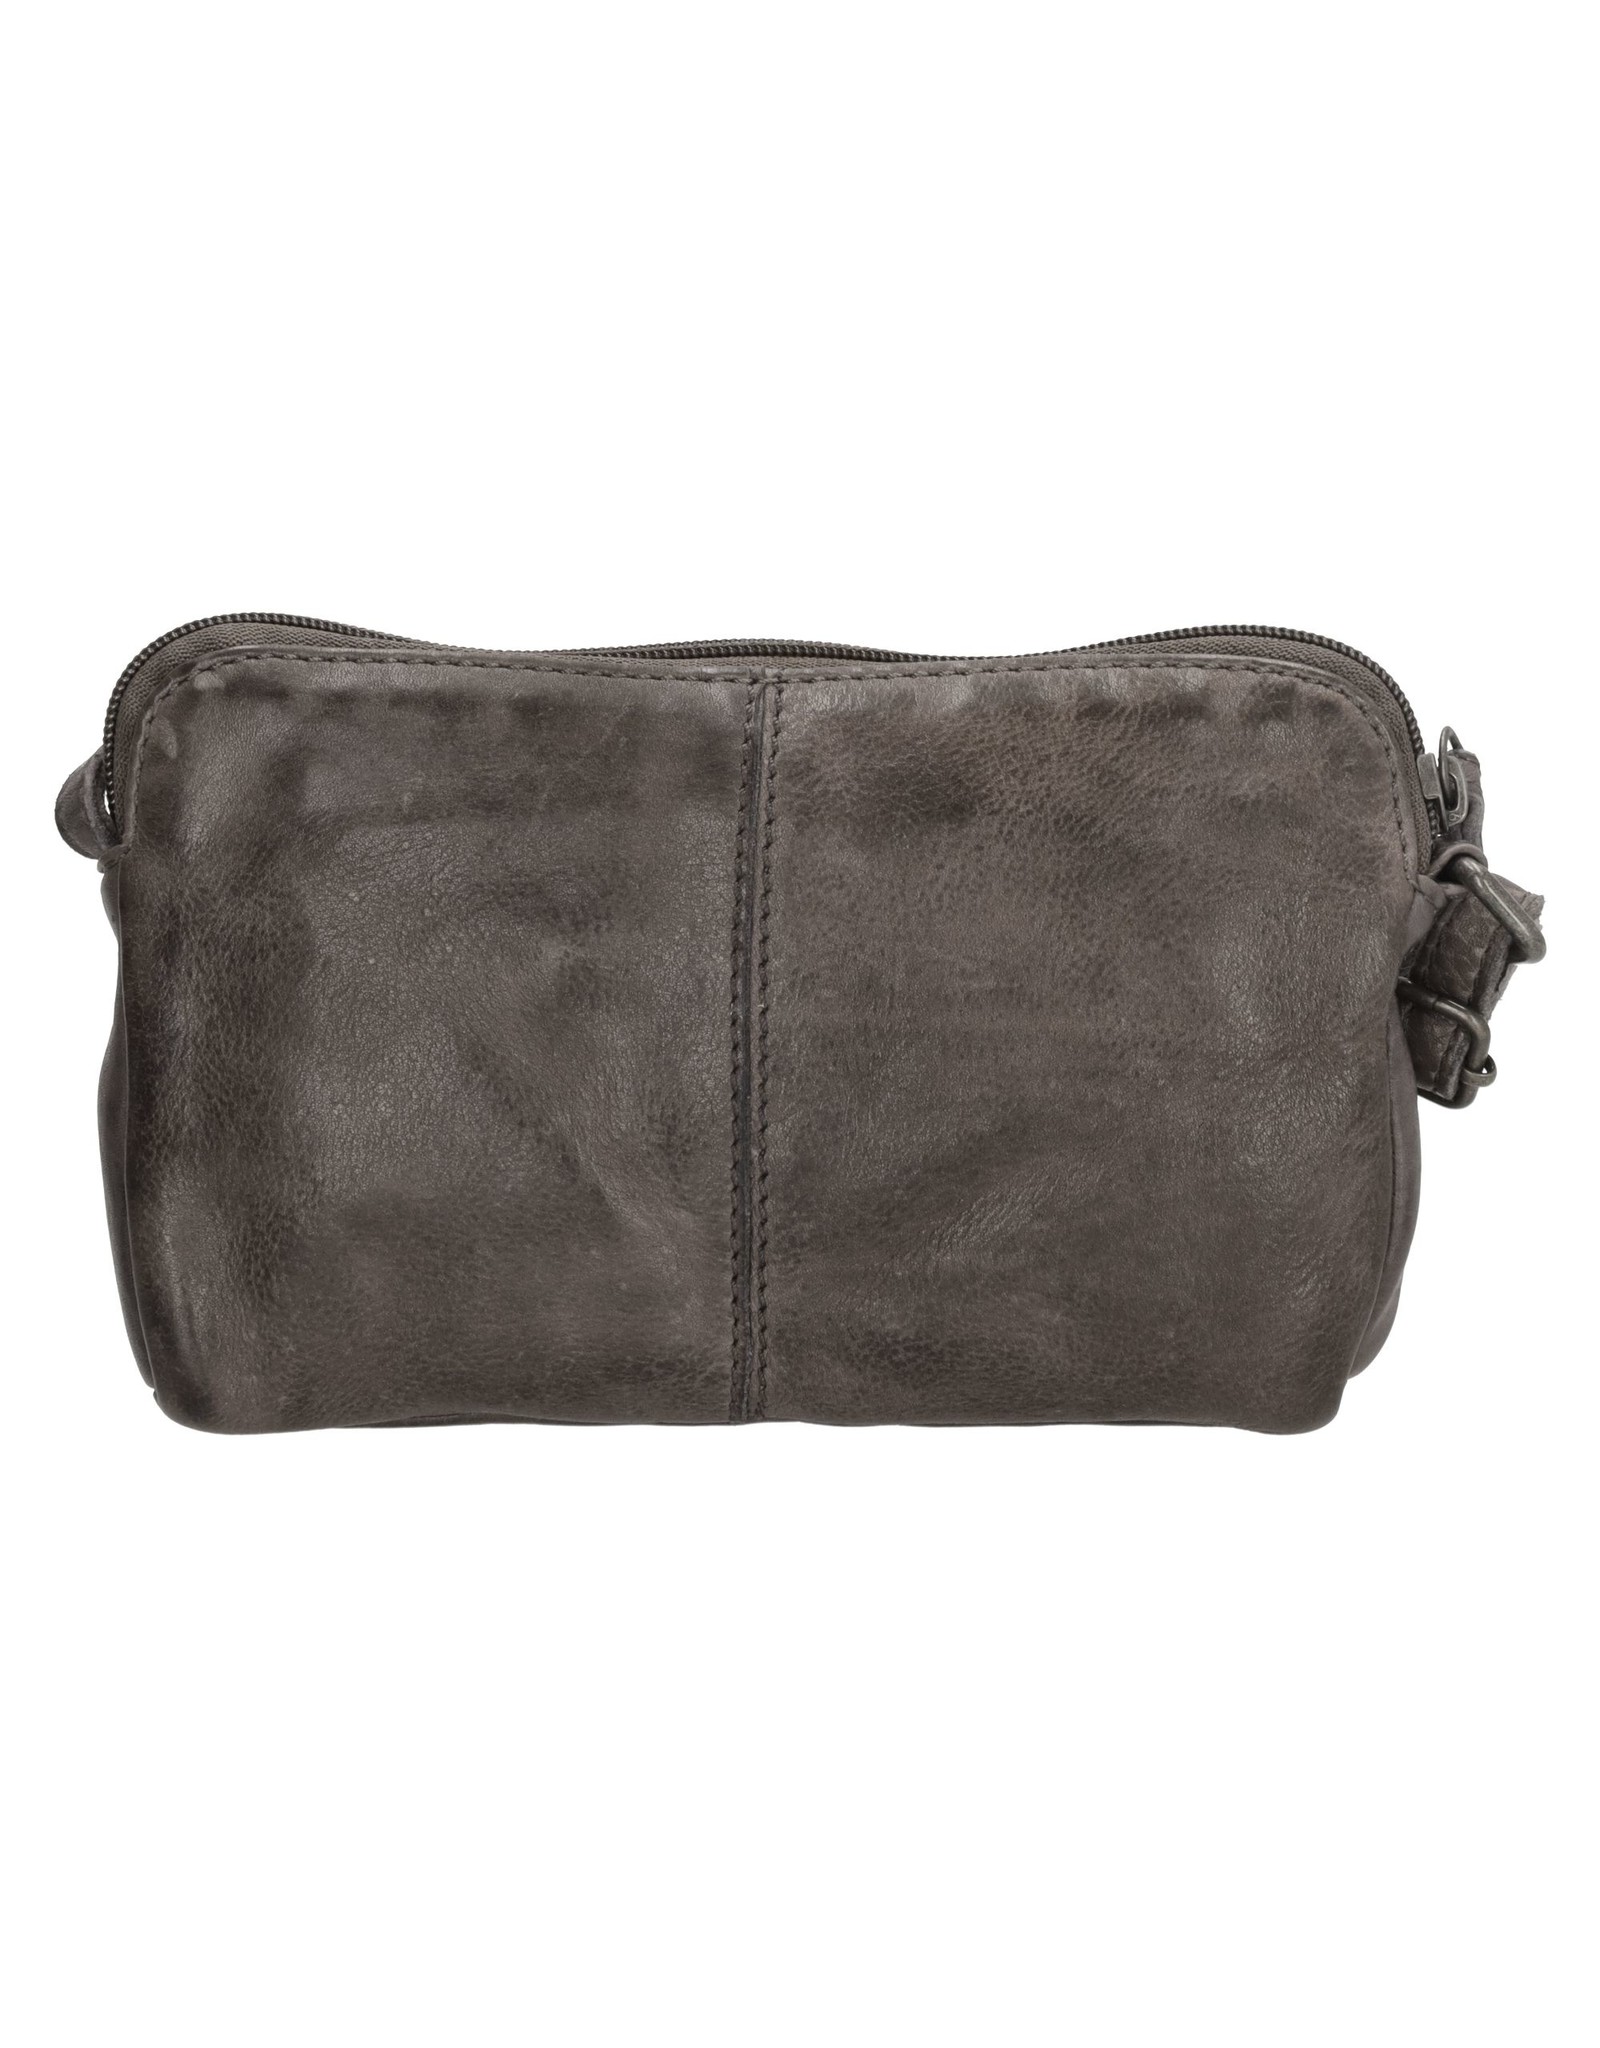 Hide & Stitches Leather Festival bags, waist bags and belt bags - Hide & Stitches Festival Bag Washed Leather Taupe